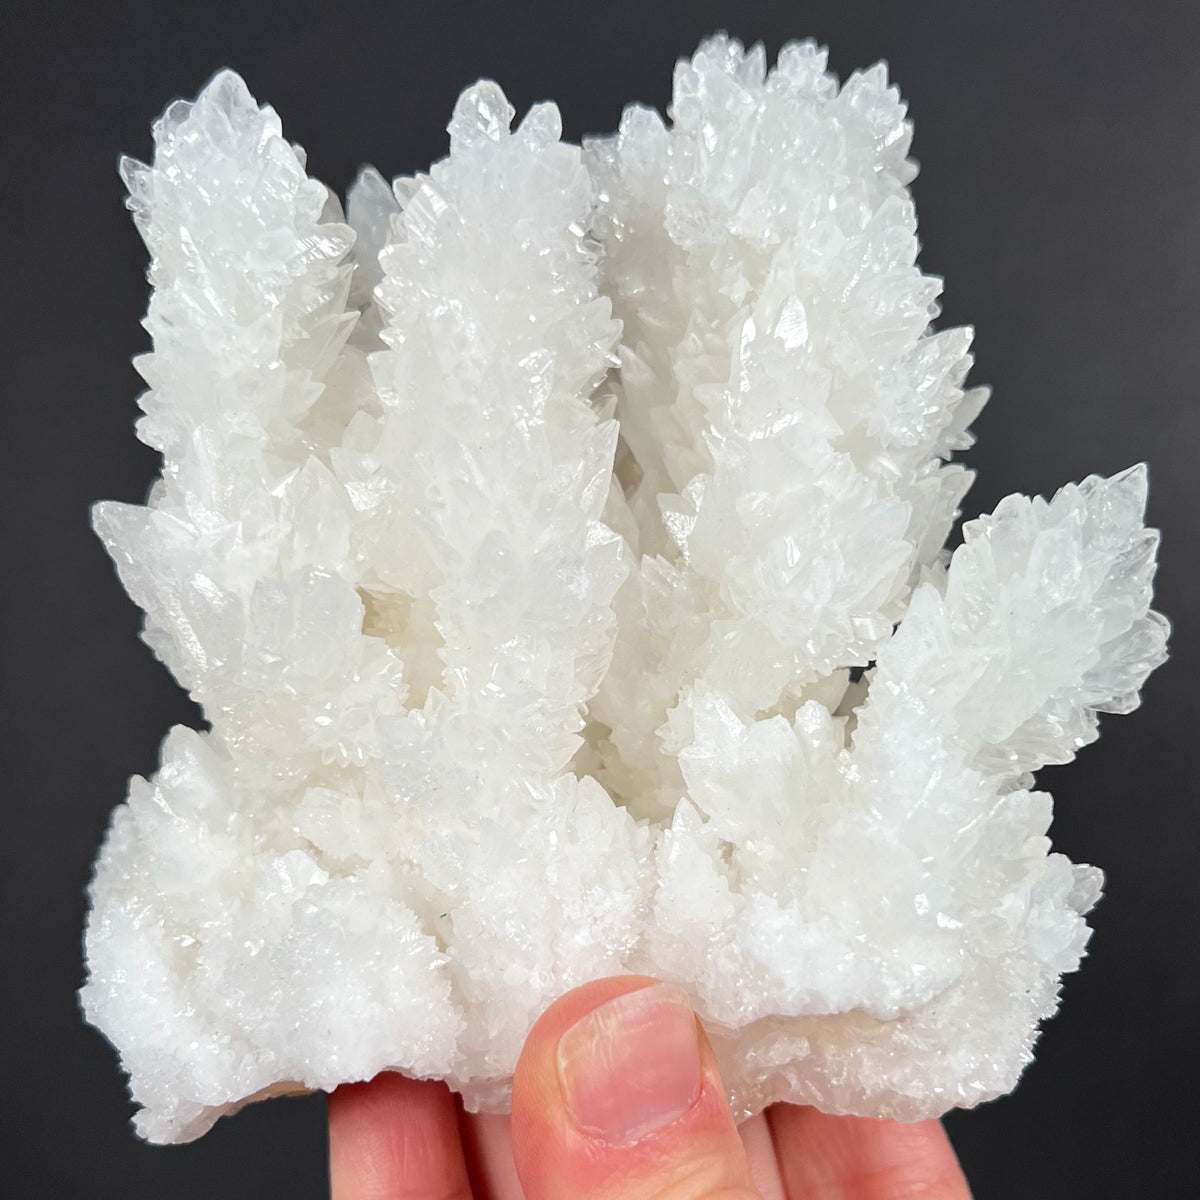 White Crystals of Calcite and Aragonite from Cave in Mexico